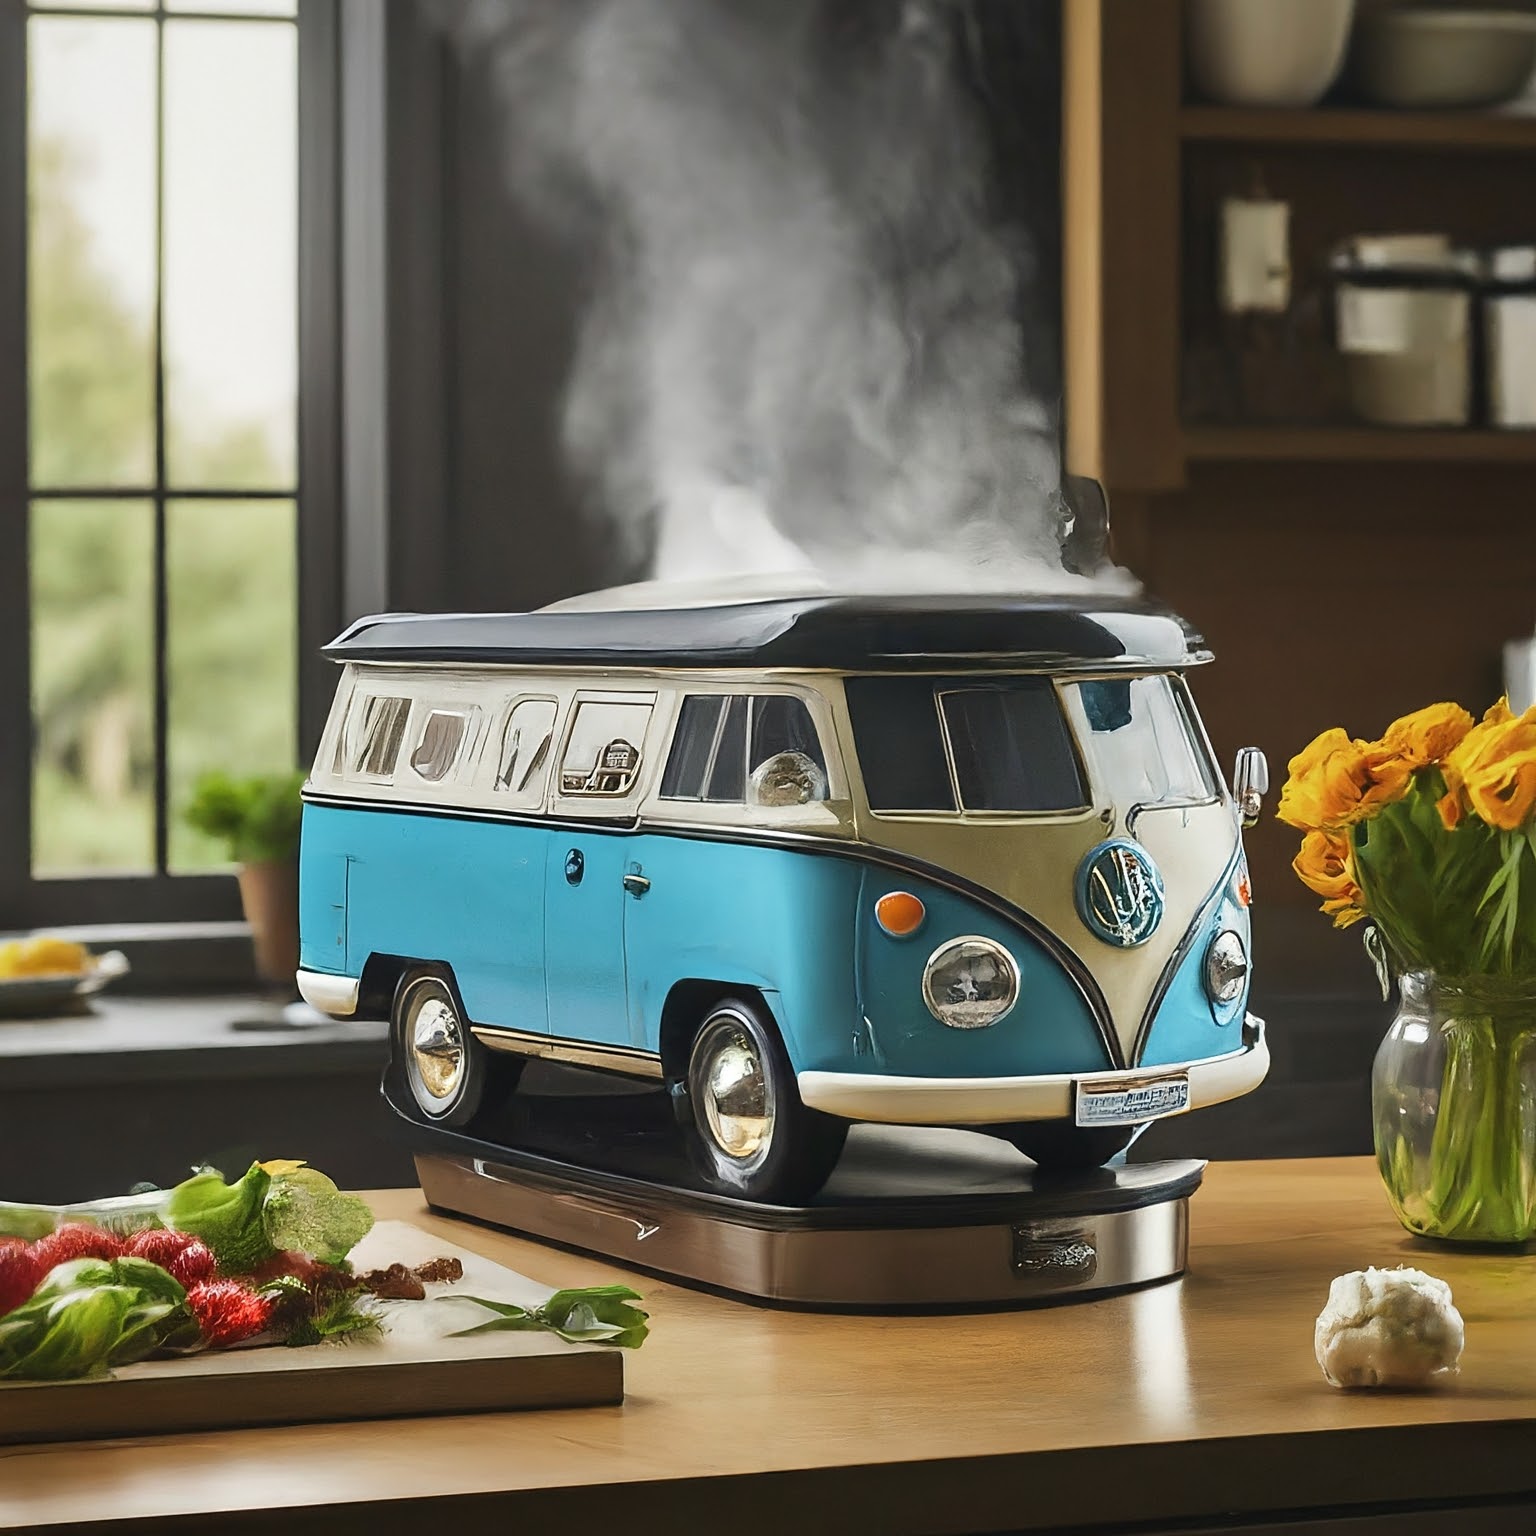 Volkswagen Bus Shaped Slow Cookers: Infusing Retro Vibes into Your Kitchen Adventure luxarts volkswagen bus slow cookers 9